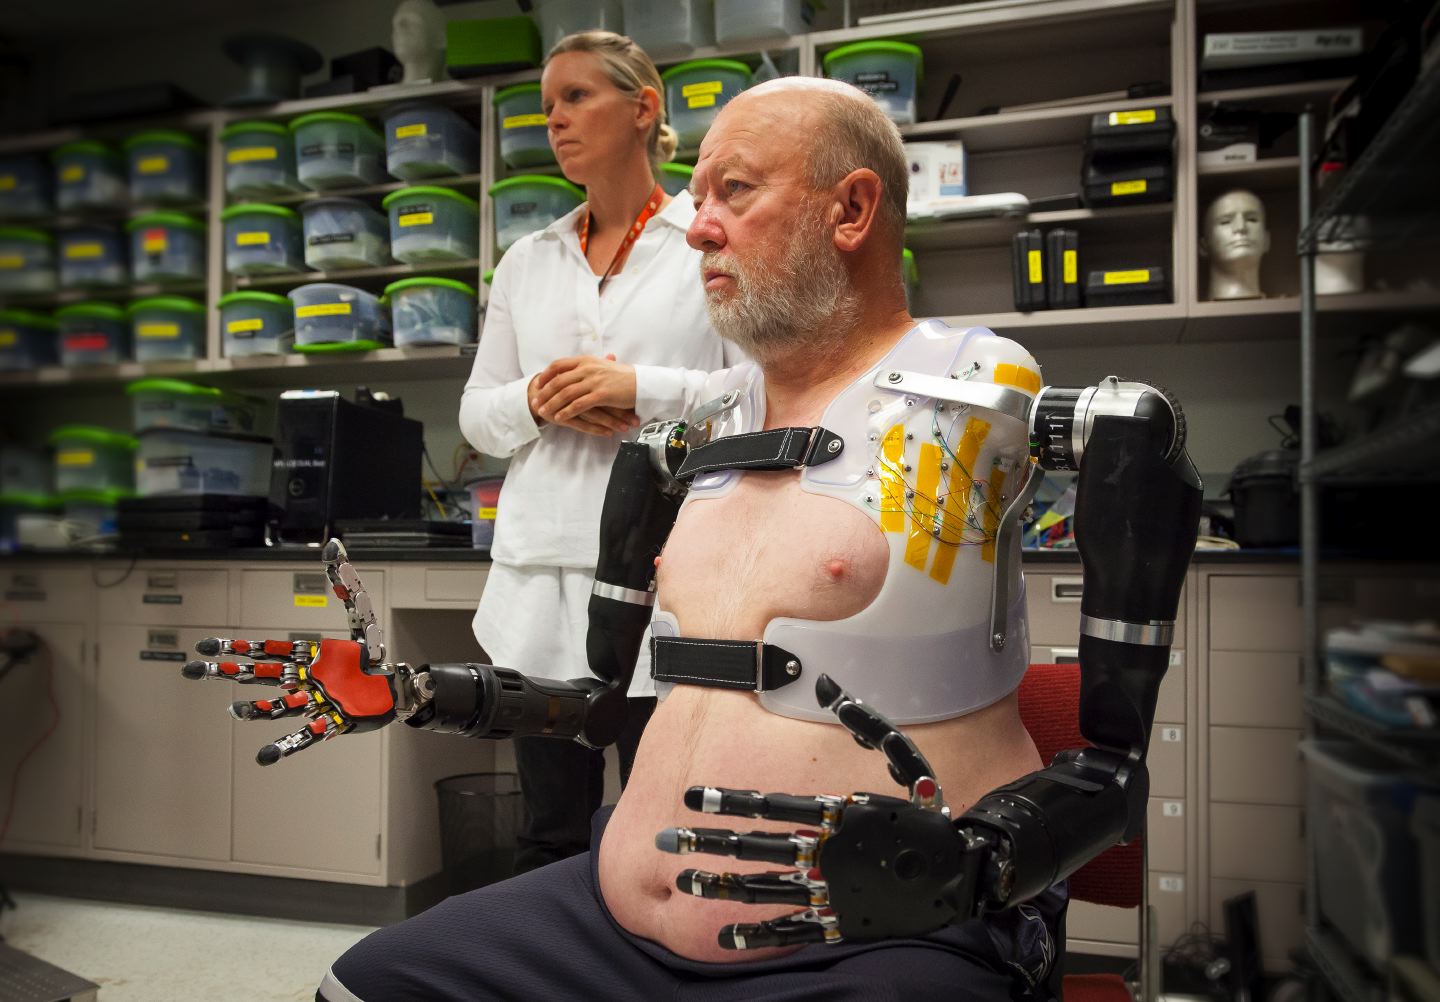 Double Amputee Controls DARPA Robotic Prosthetic Arms With His Mind